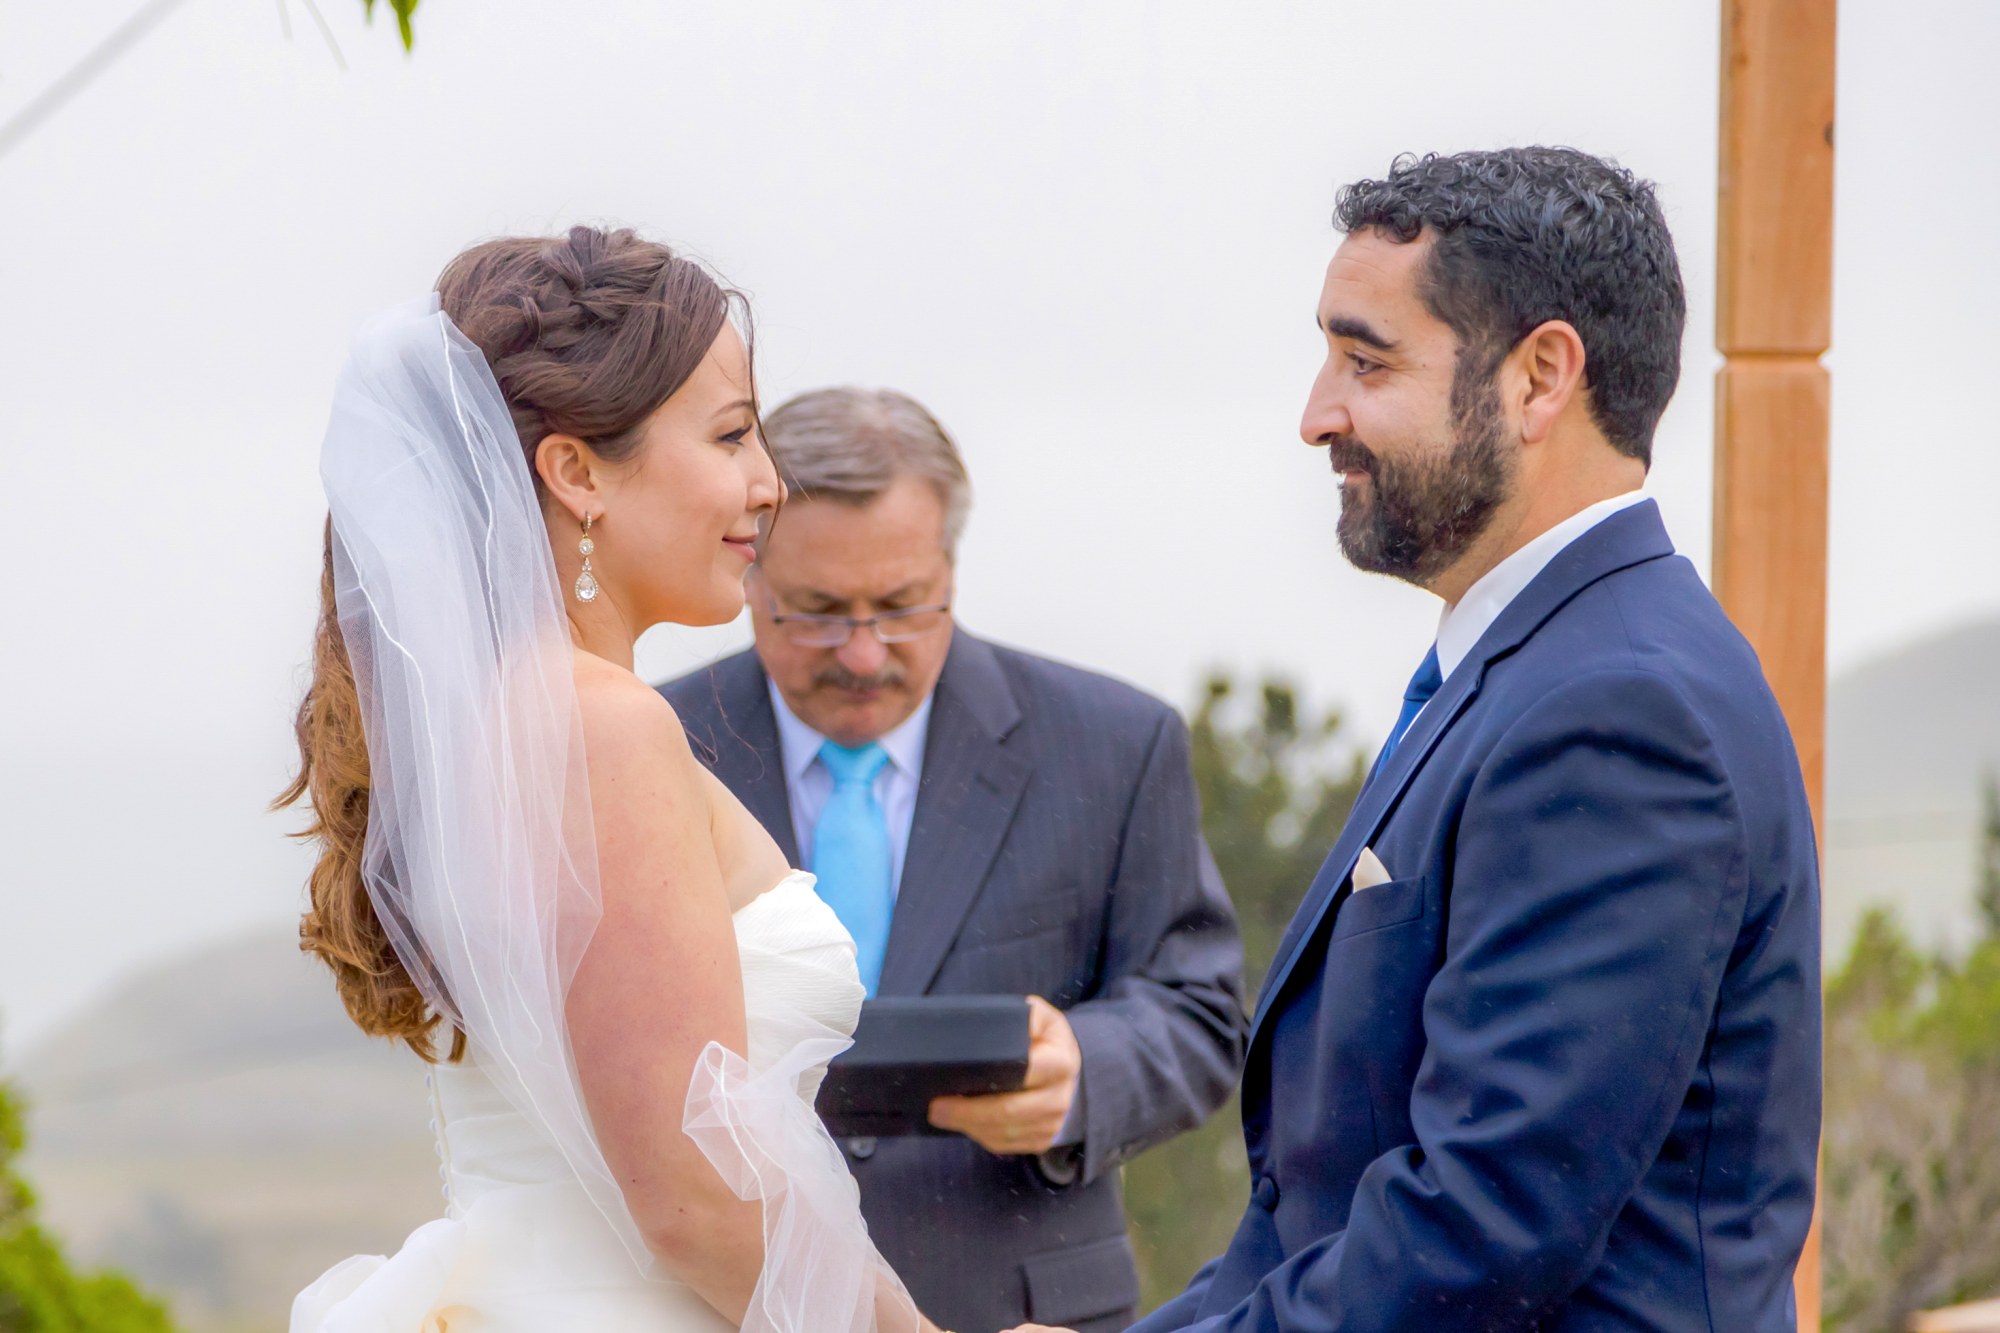 man in blue suit jacket holding woman in white wedding dress